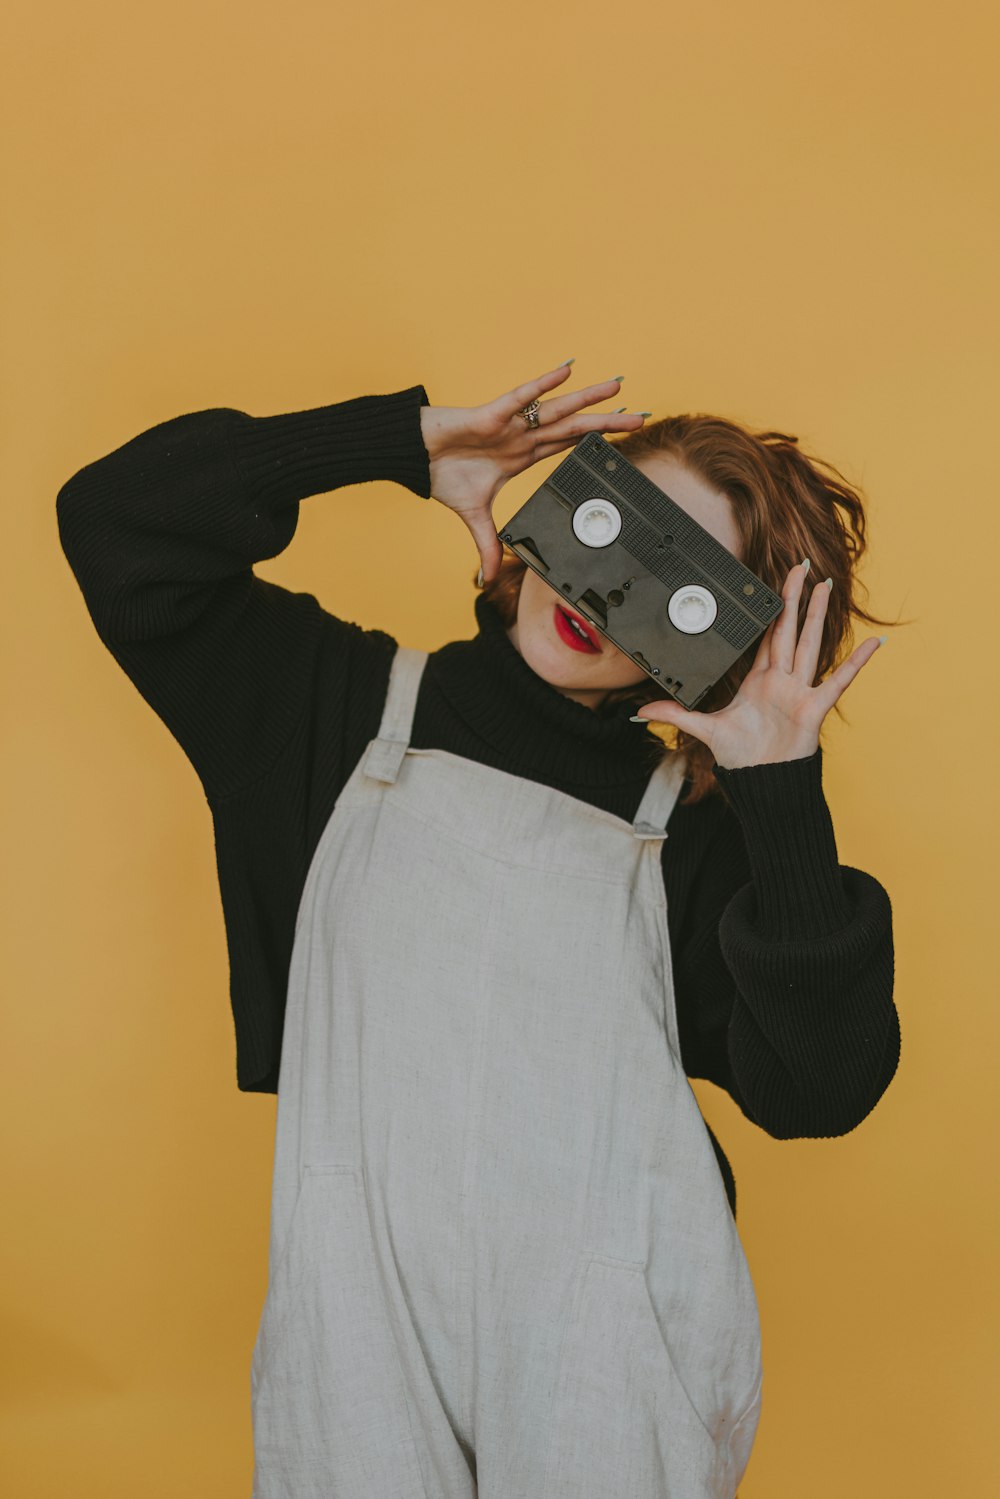 a woman wearing overalls and a black sweater is holding a camera up to her